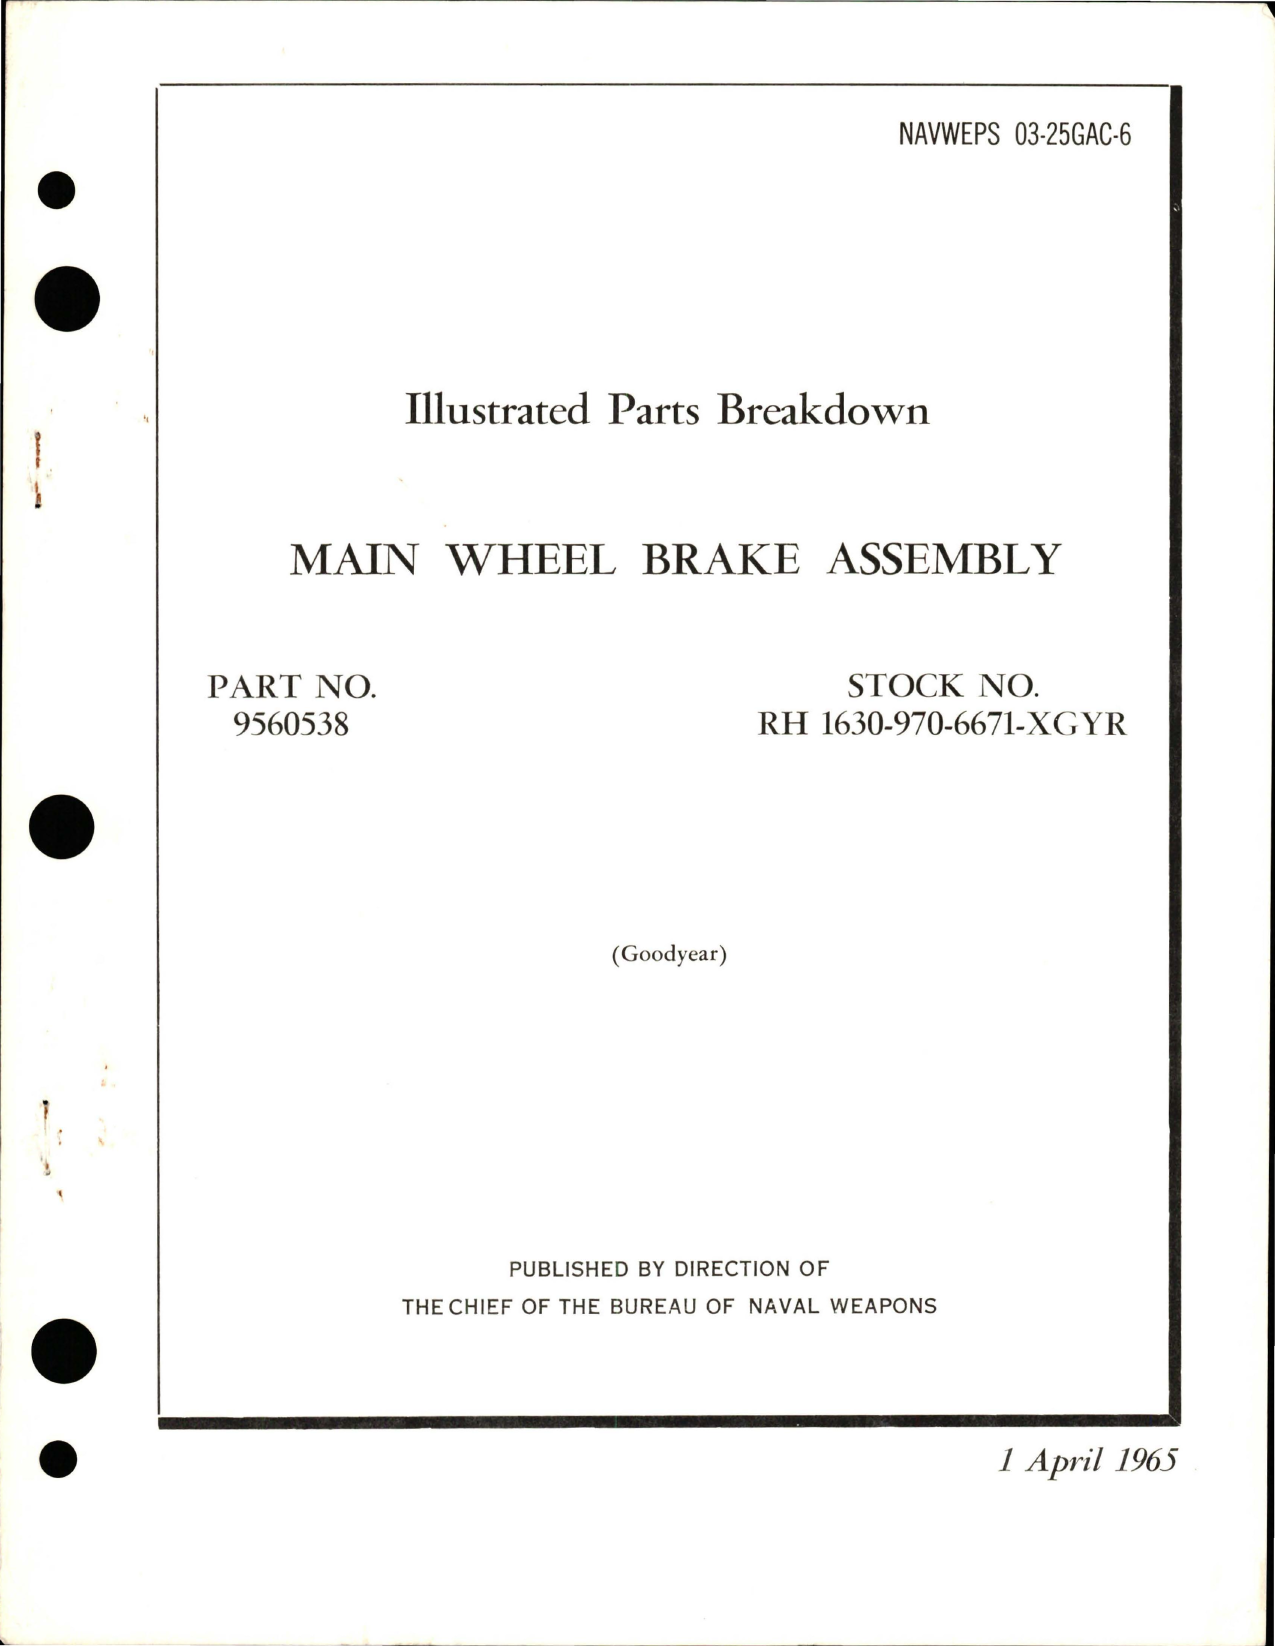 Sample page 1 from AirCorps Library document: Illustrated Parts Breakdown for Main Wheel Brake Assembly - Part 9560538